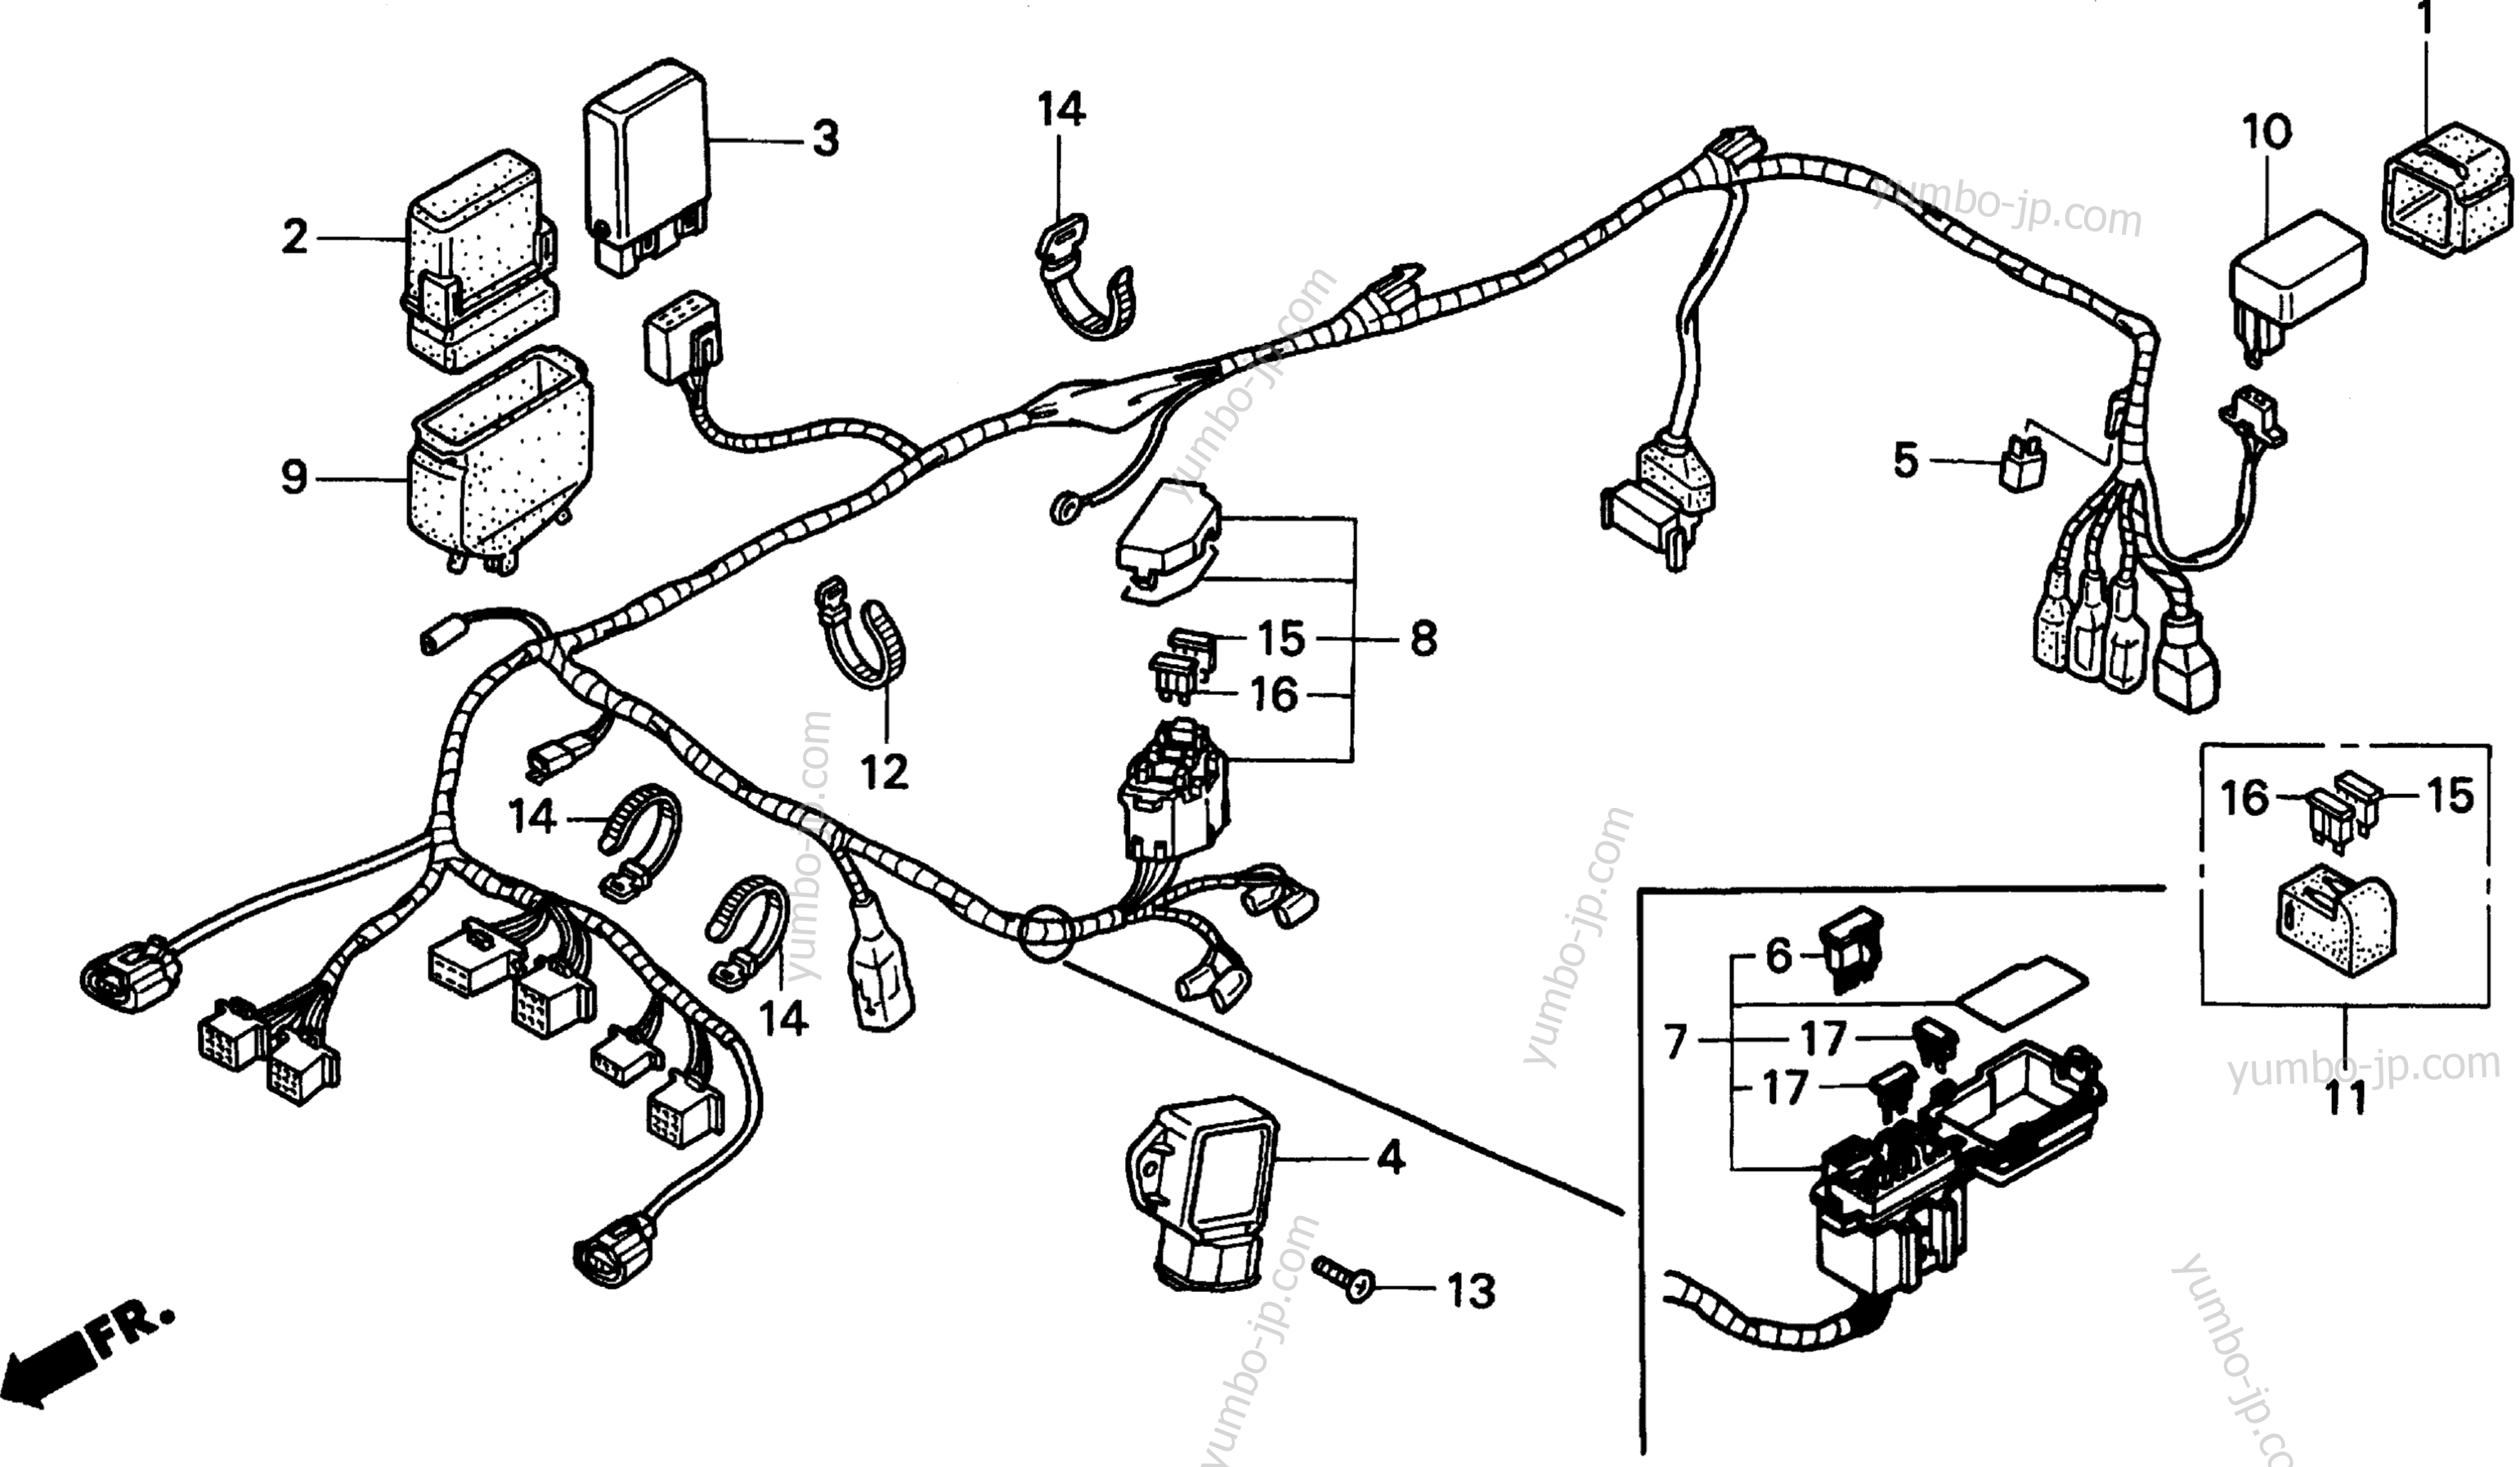 WIRE HARNESS for motorcycles HONDA PC800 A 1995 year